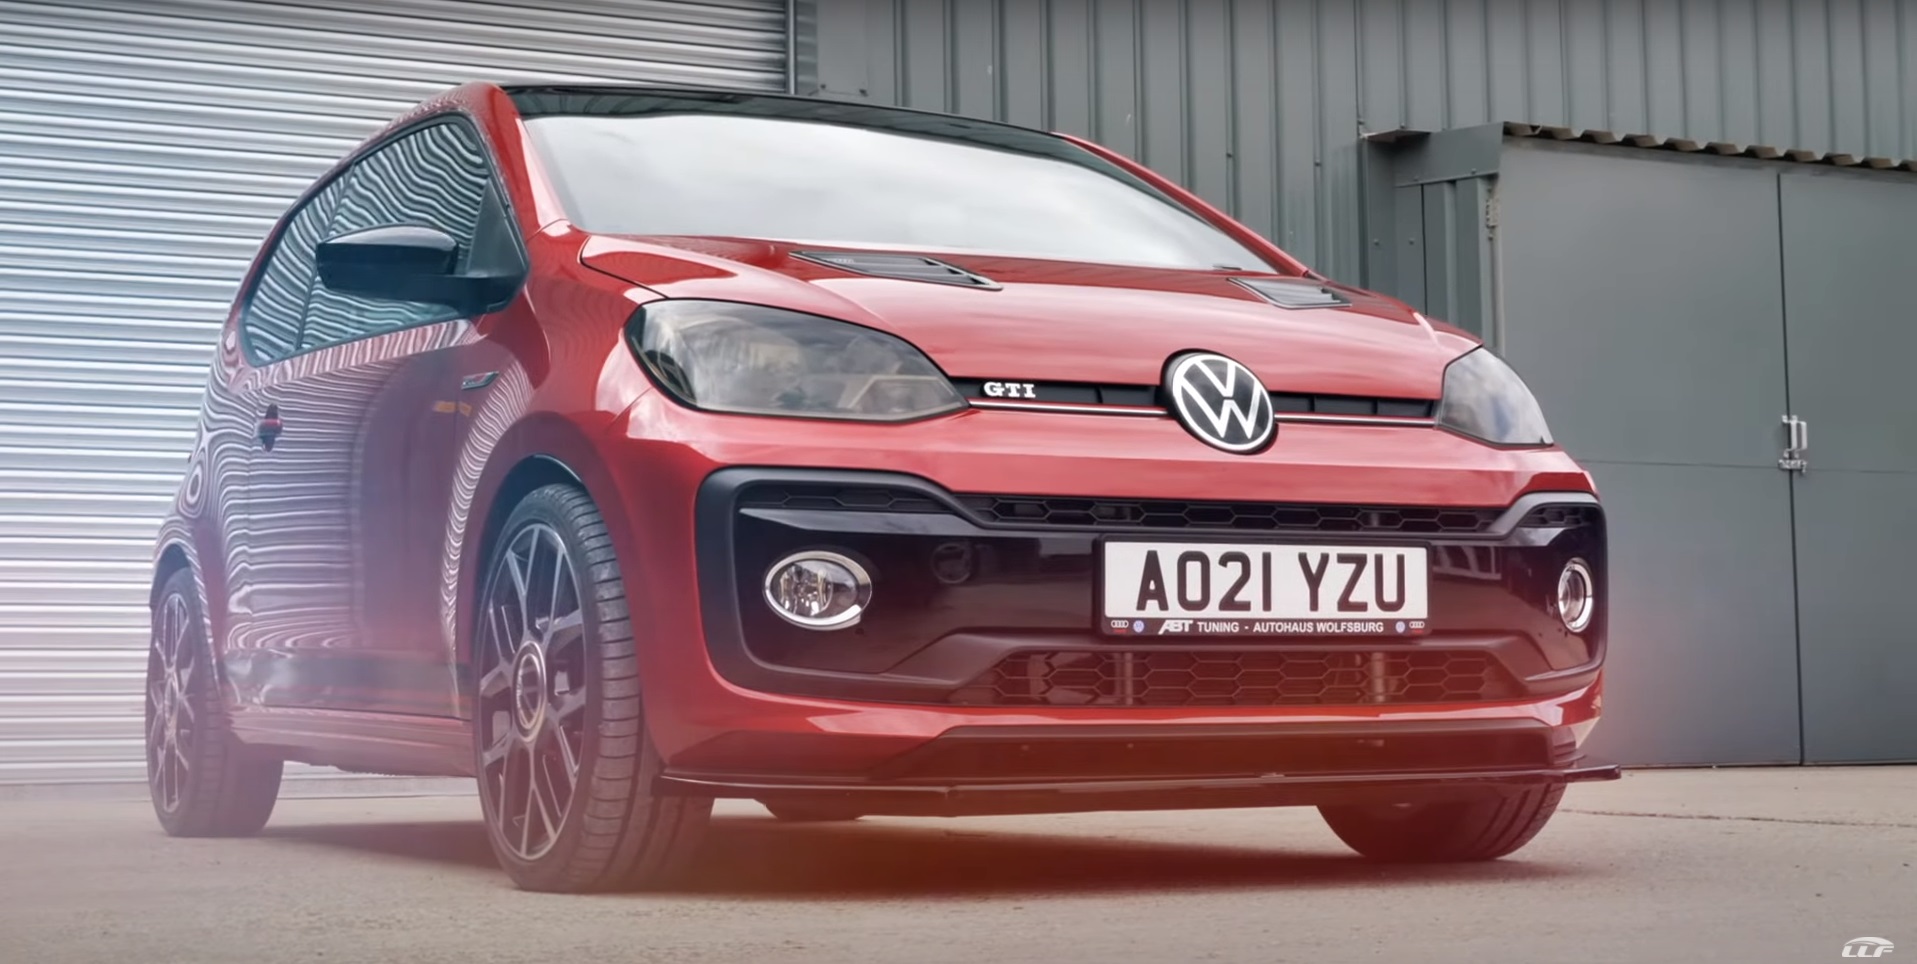 https://s1.cdn.autoevolution.com/images/news/168hp-10-liter-vw-up-gti-debunks-no-replacement-for-displacement-myth-169511_1.jpg